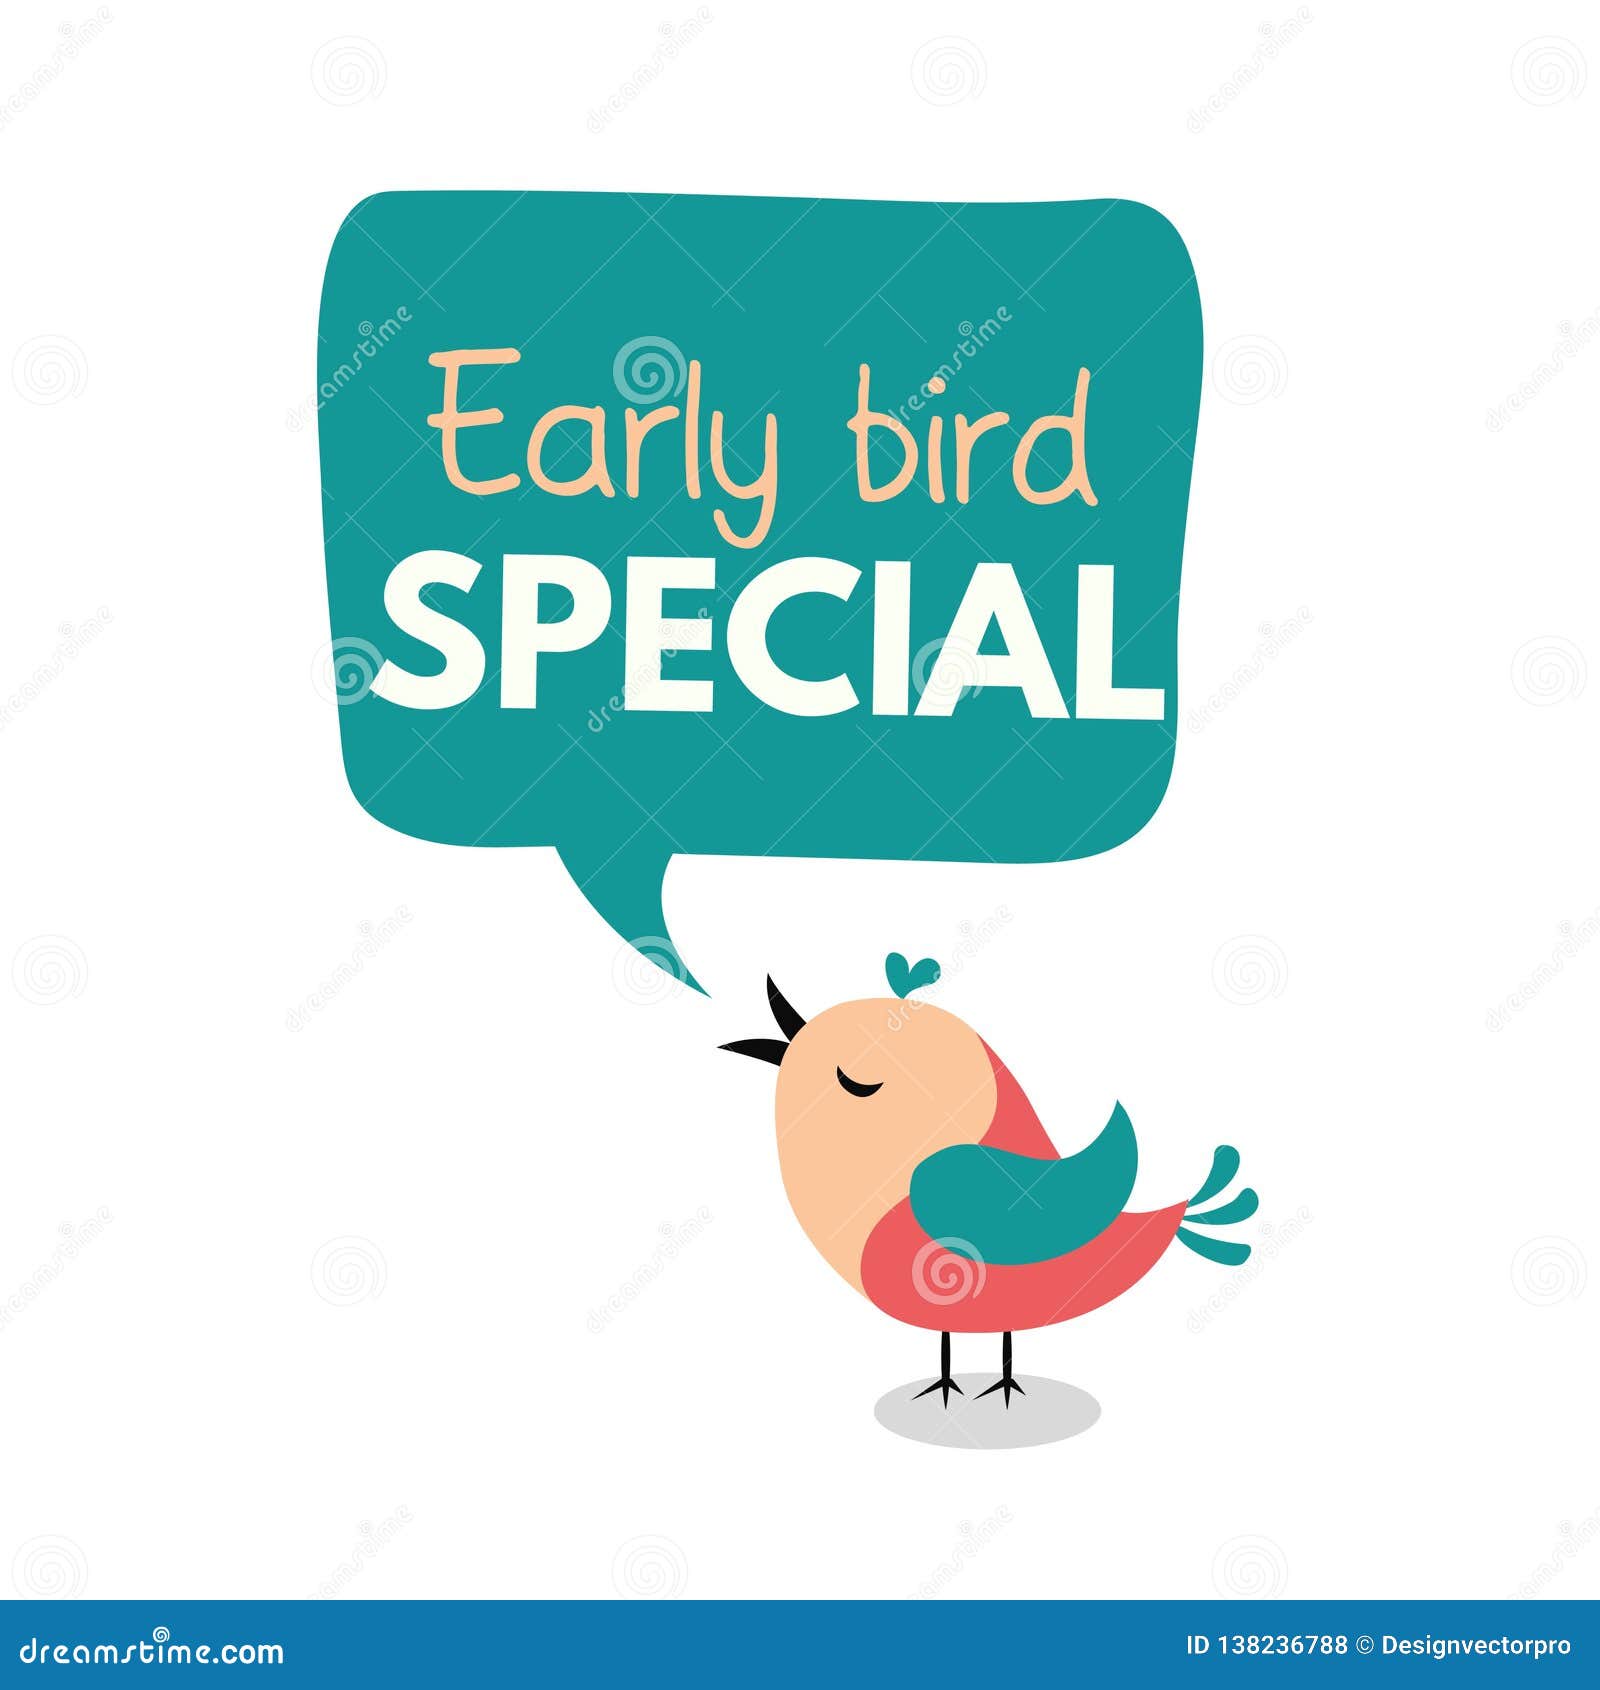 early bird special flyer or banner  template. early bird discount promotion.  